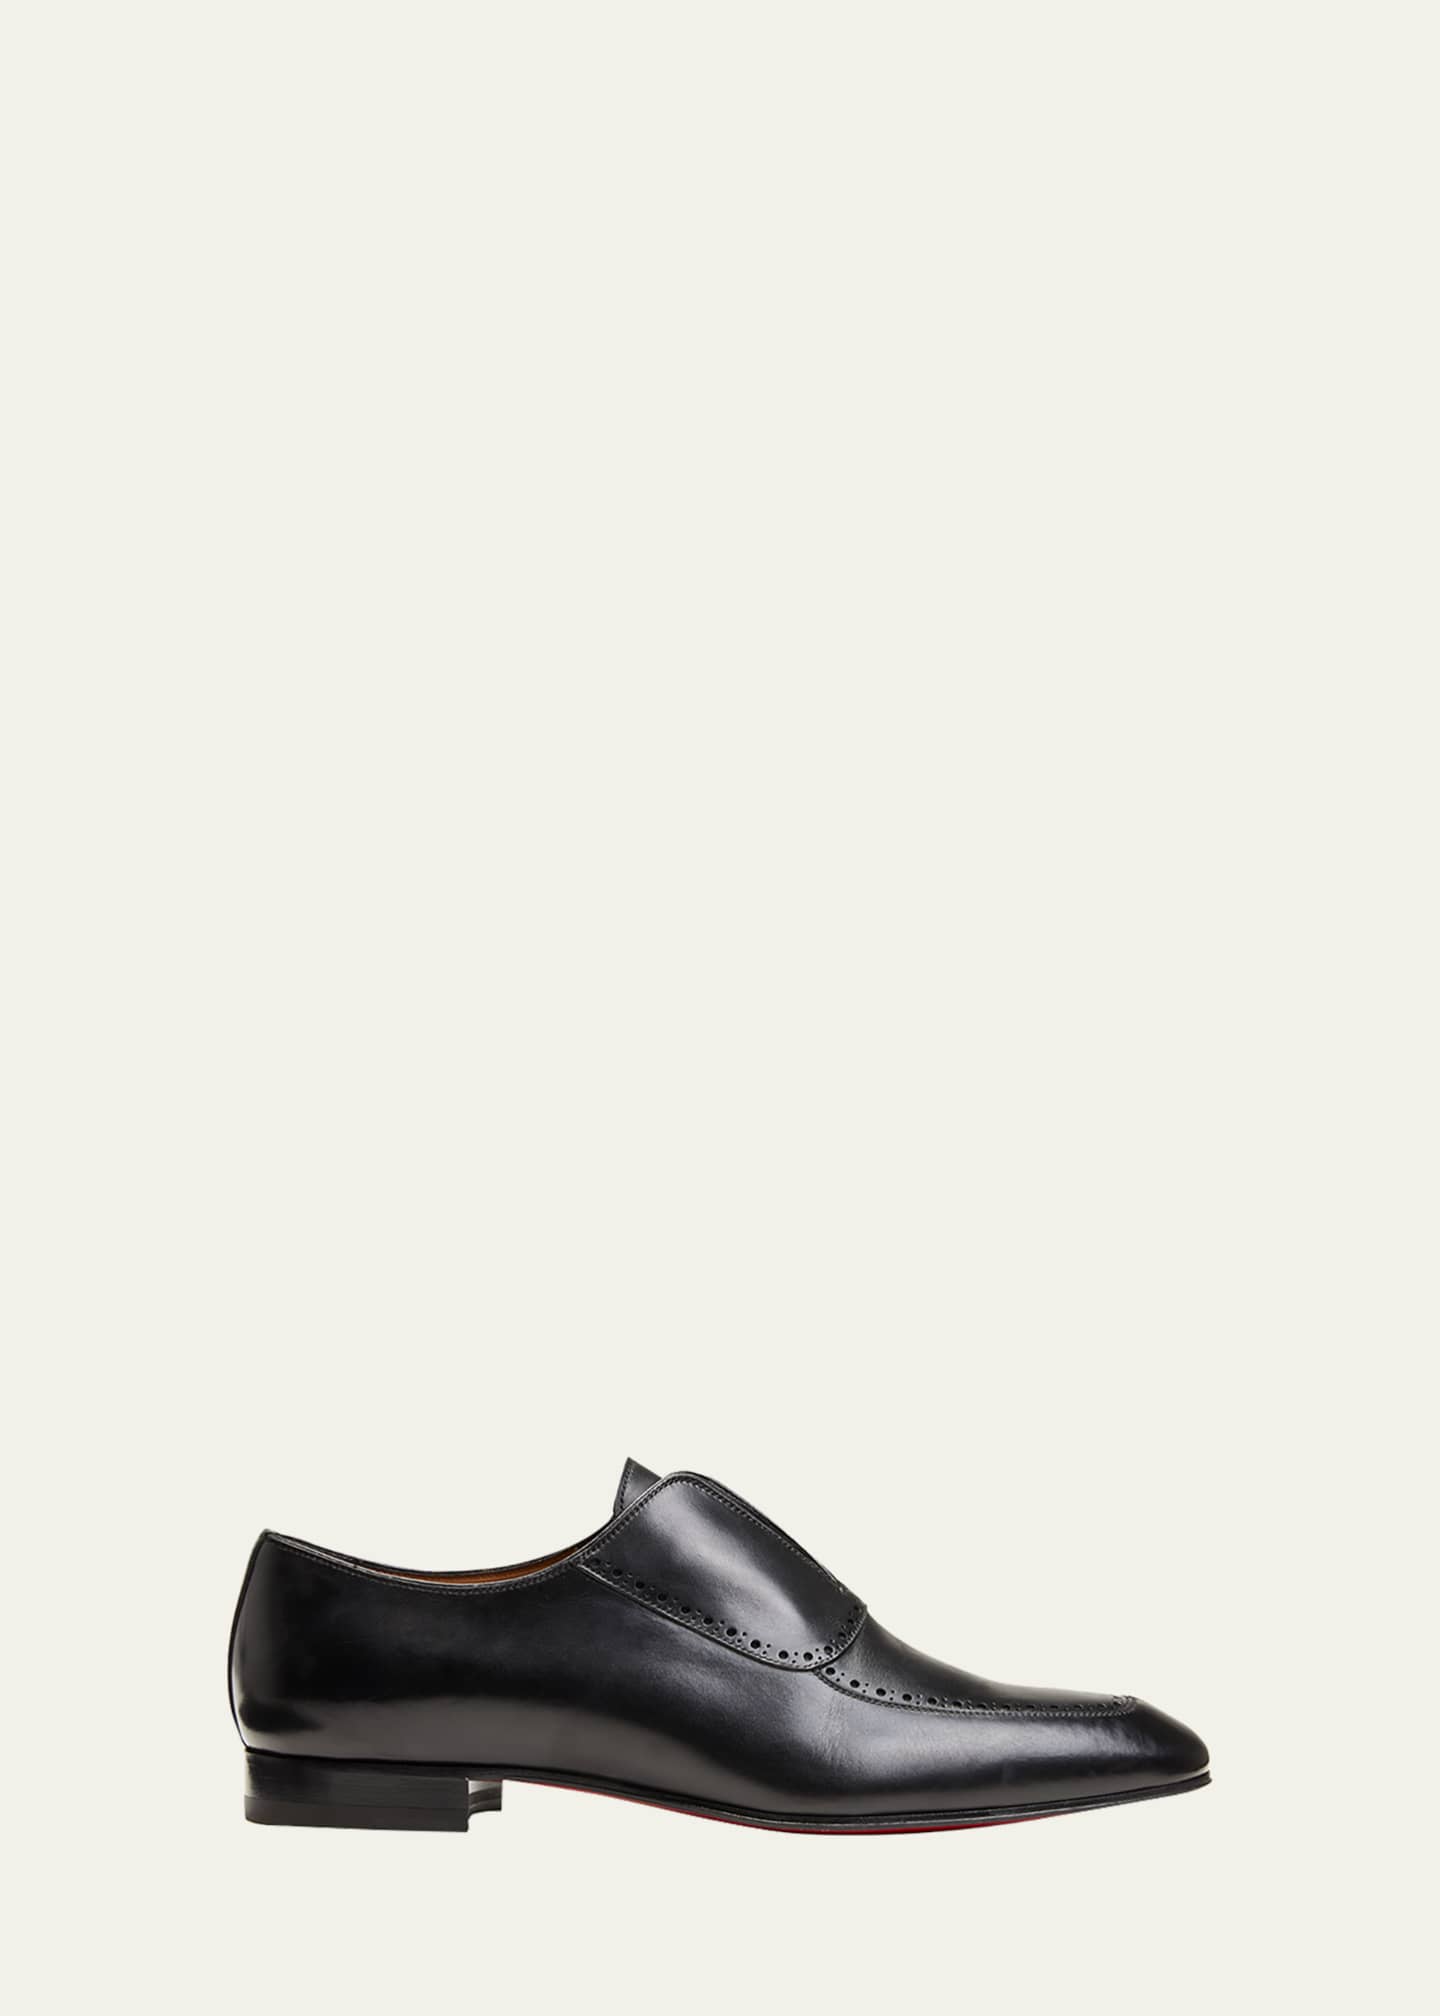 Christian Louboutin Men's Lafitte Leather Slip-On Loafers - Bergdorf ...